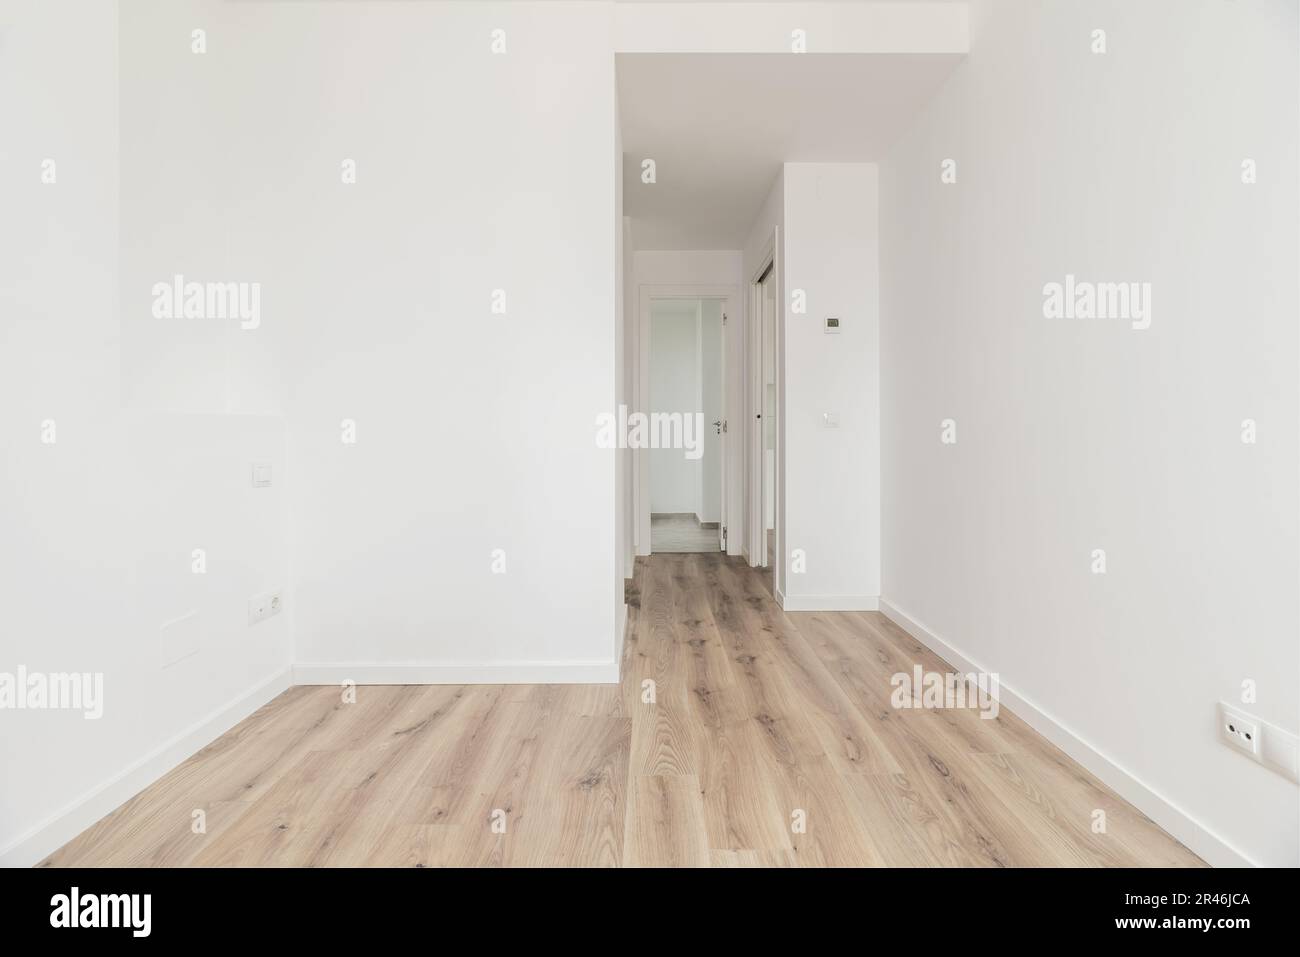 An empty bedroom with an en-suite bathroom in the background, wooden floors and plain white painted walls Stock Photo